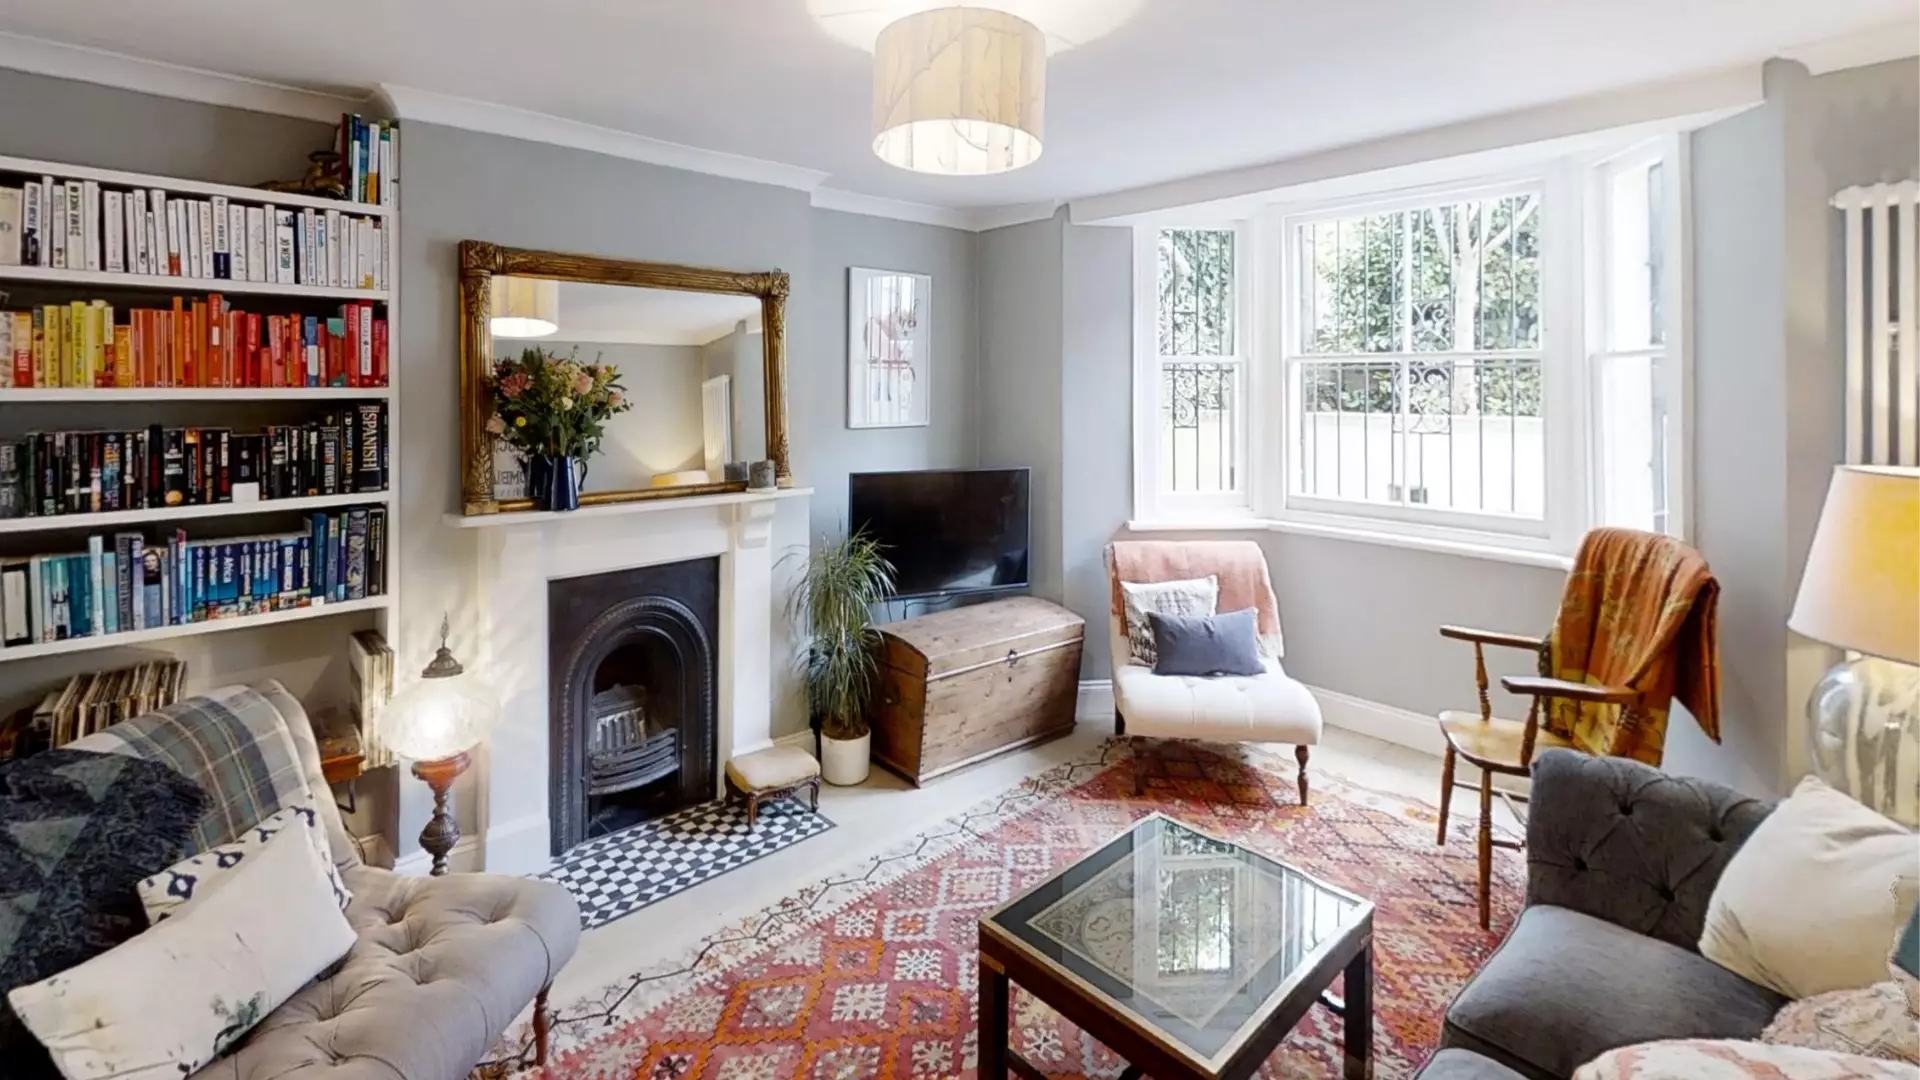 The beautiful property is located in Denmark Hill, London (